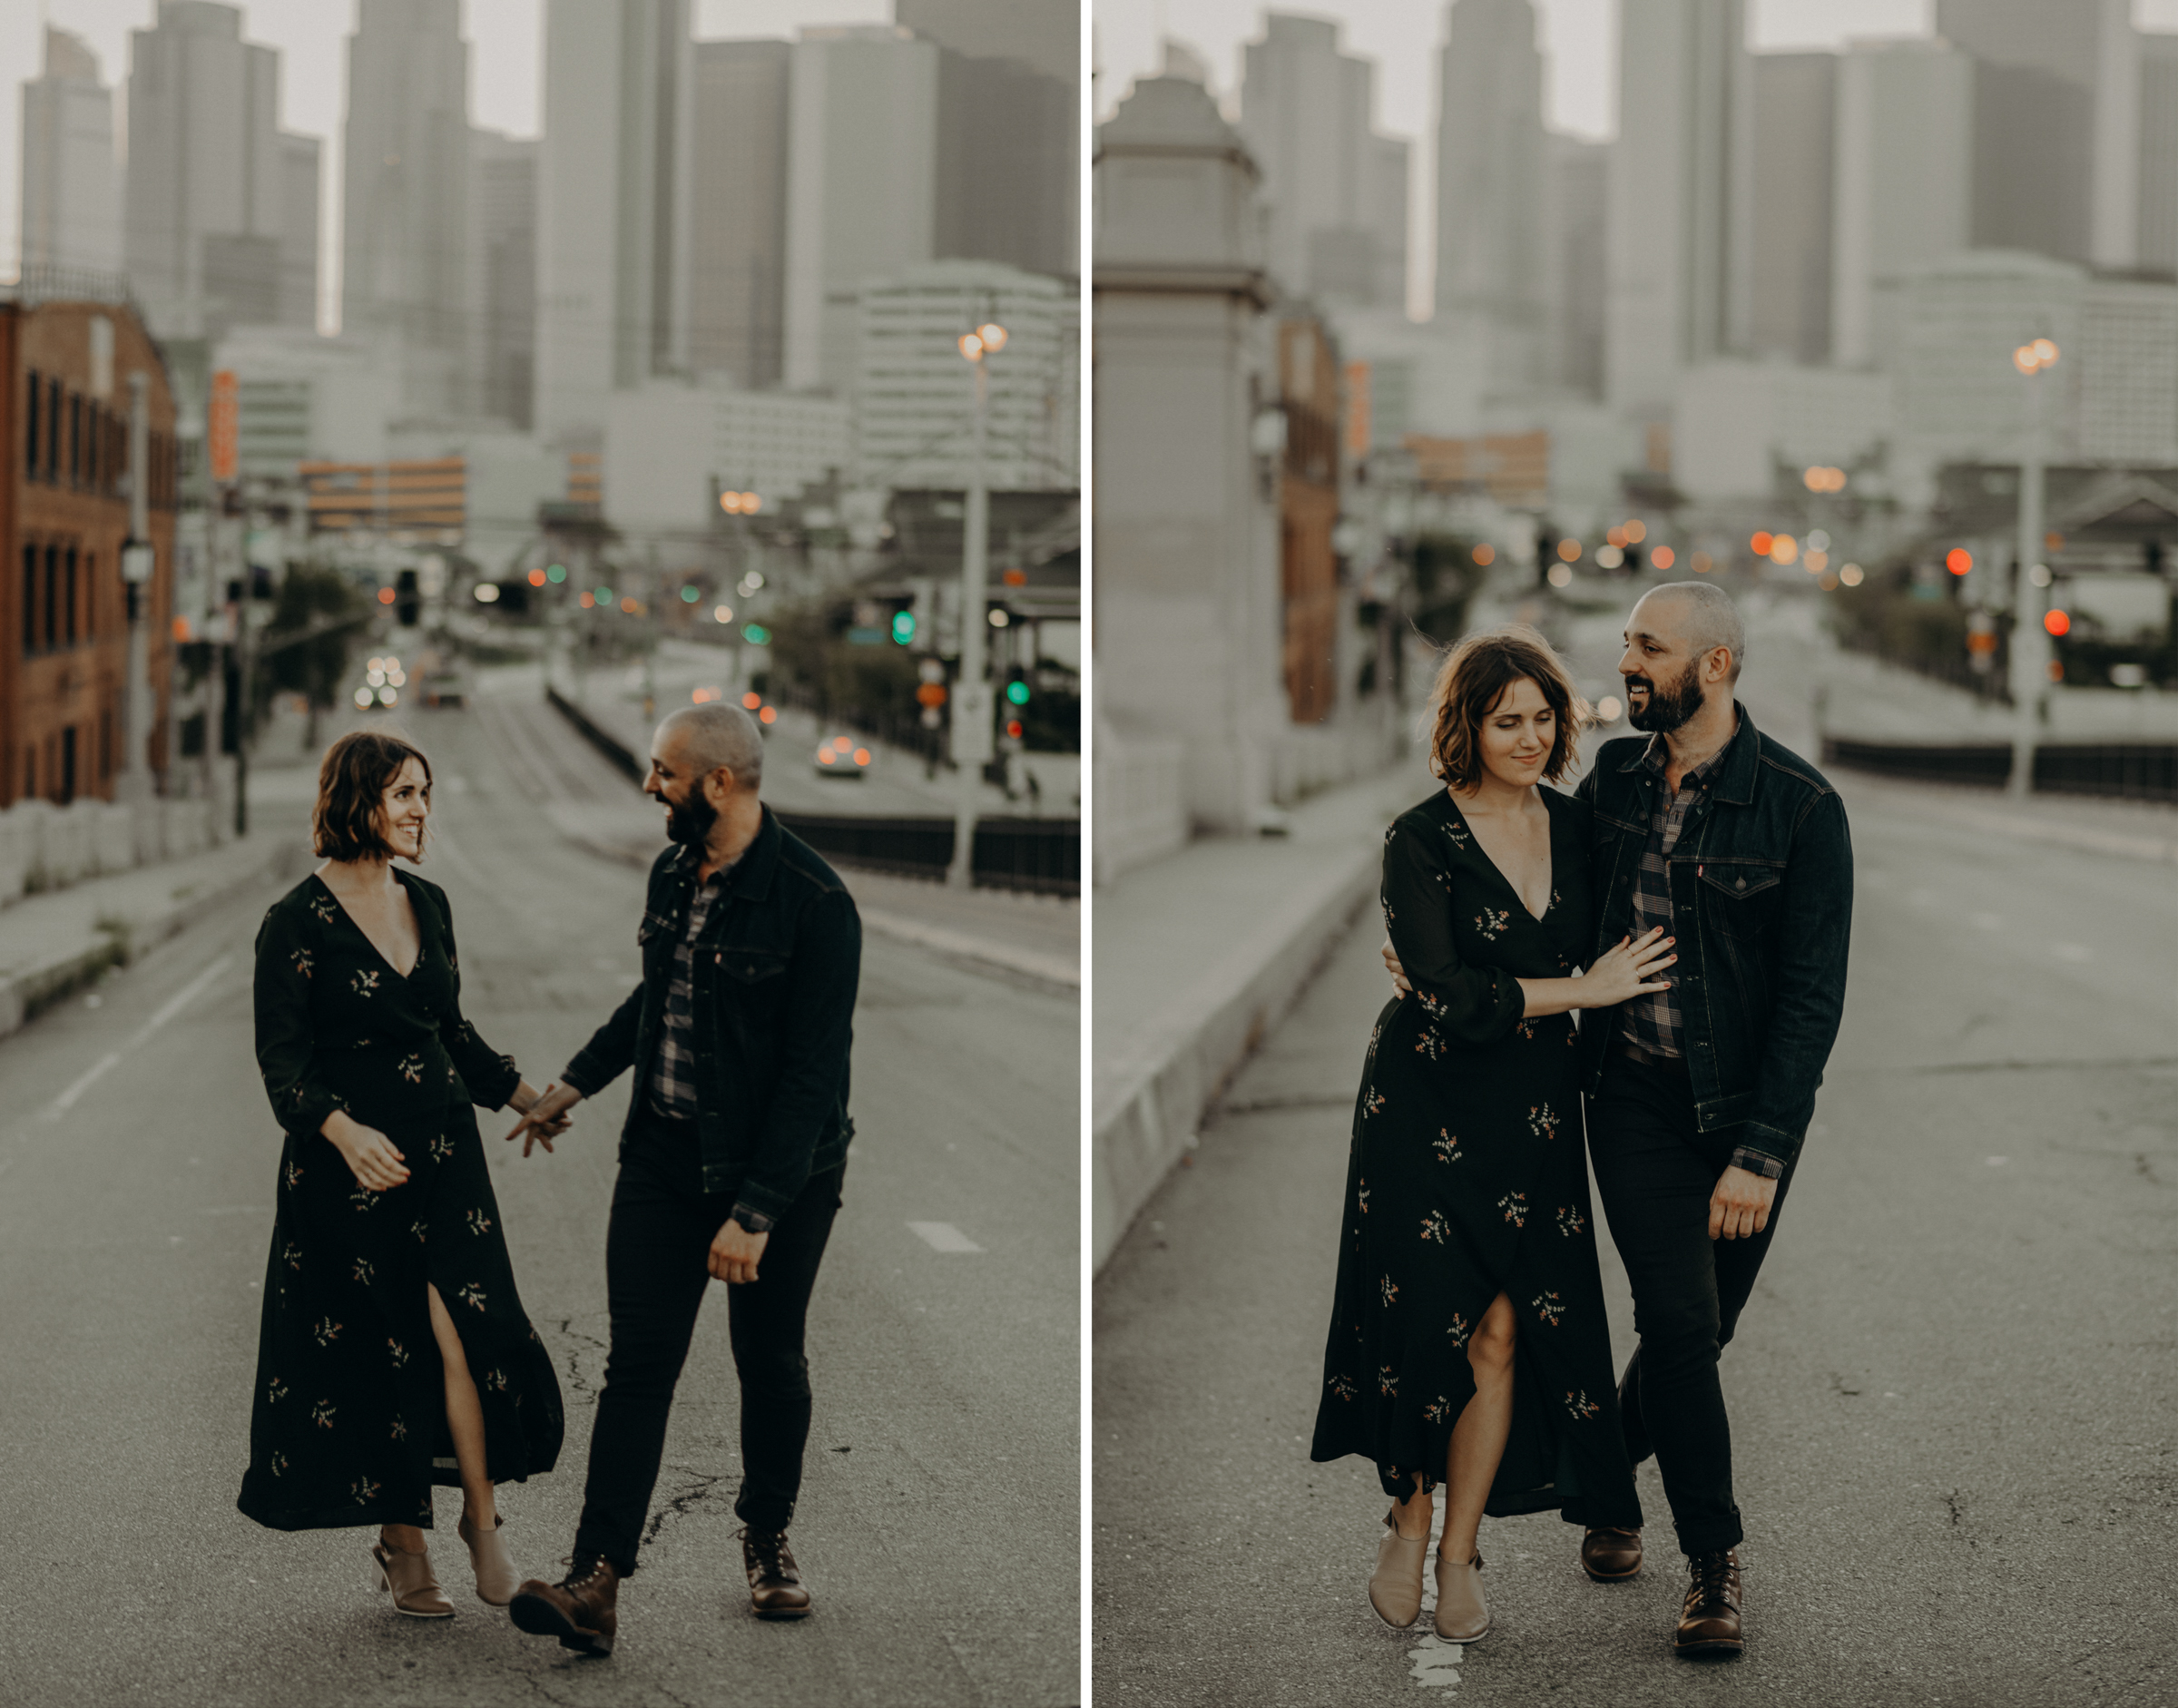 Isaiah + Taylor Photography - Los Angeles Wedding Photographer - Arts District DTLA Engagement Session-1.jpg